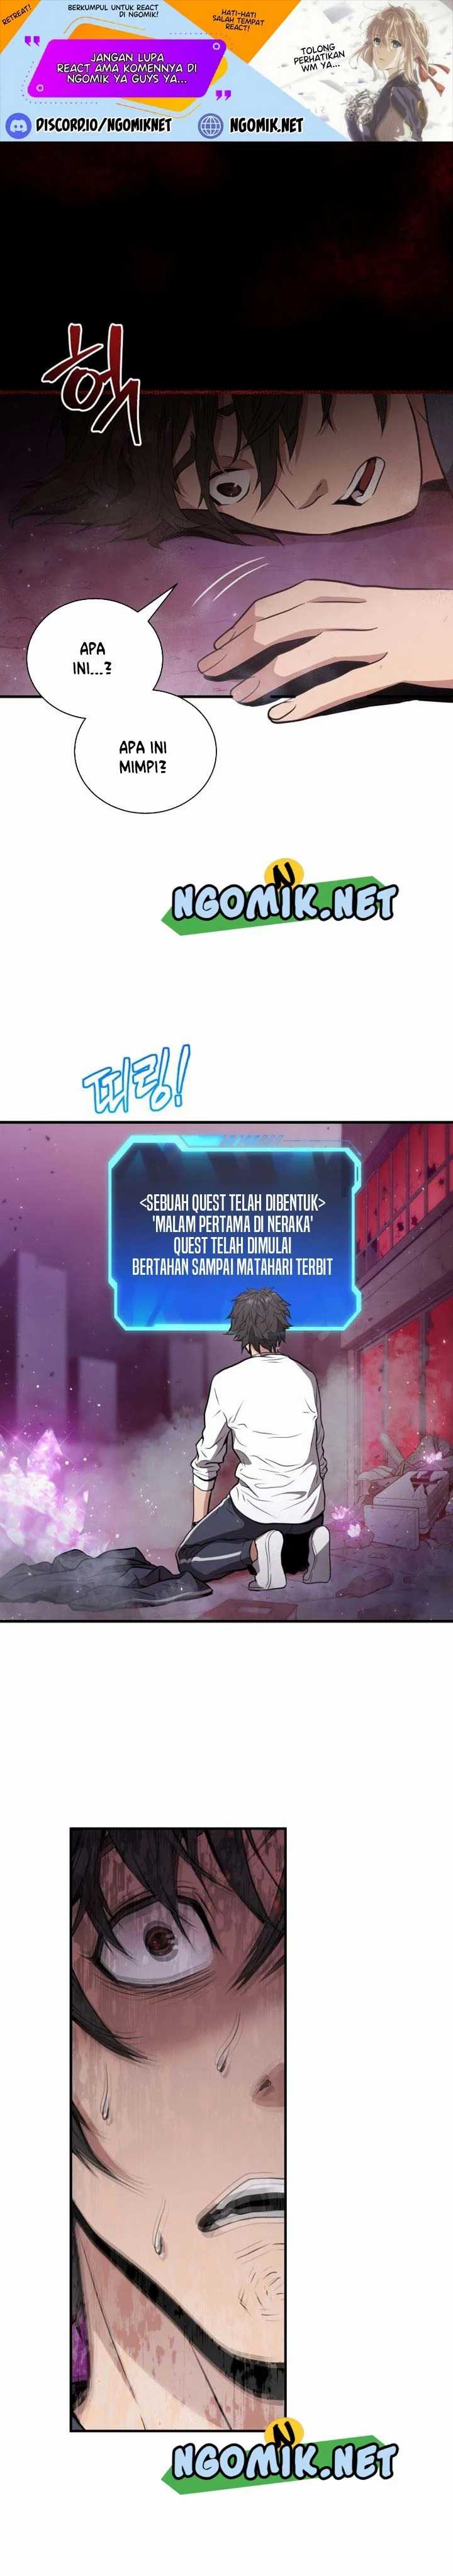 Hoarding in Hell Chapter 02